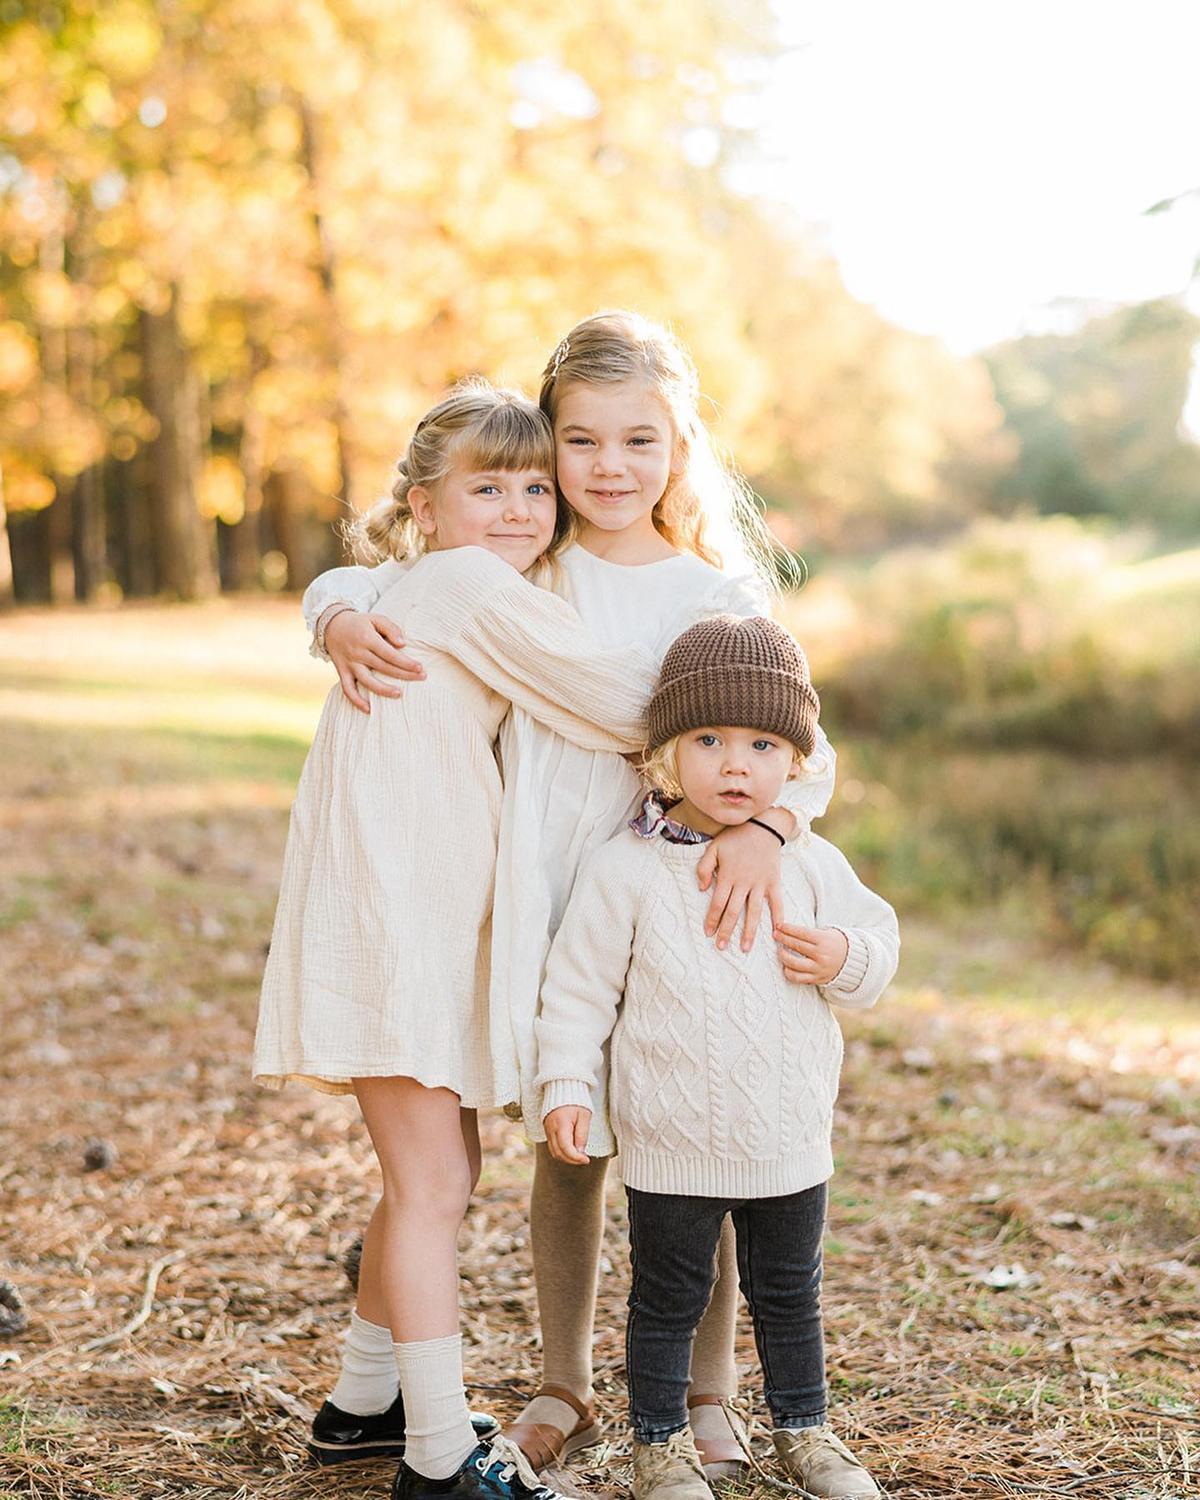 The siblings: Florence (C), 7, Clementine, 5, and Theodore, 3. (Courtesy of <a href="https://www.instagram.com/flourishingmotherhood/">Meg Thompson</a>)